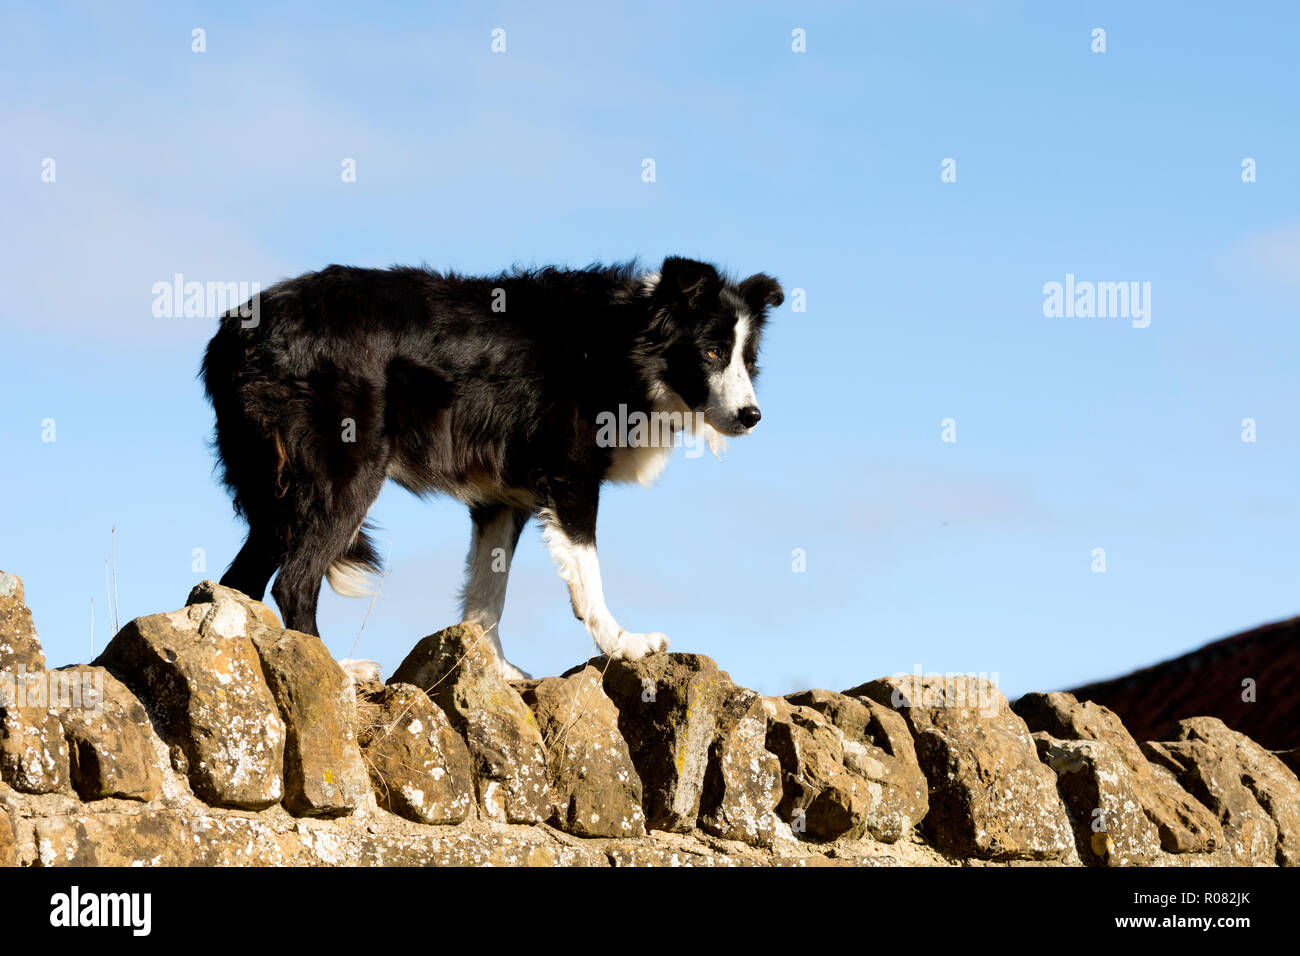 A Border Collie dog stood on a rustic stone wall Stock Photo